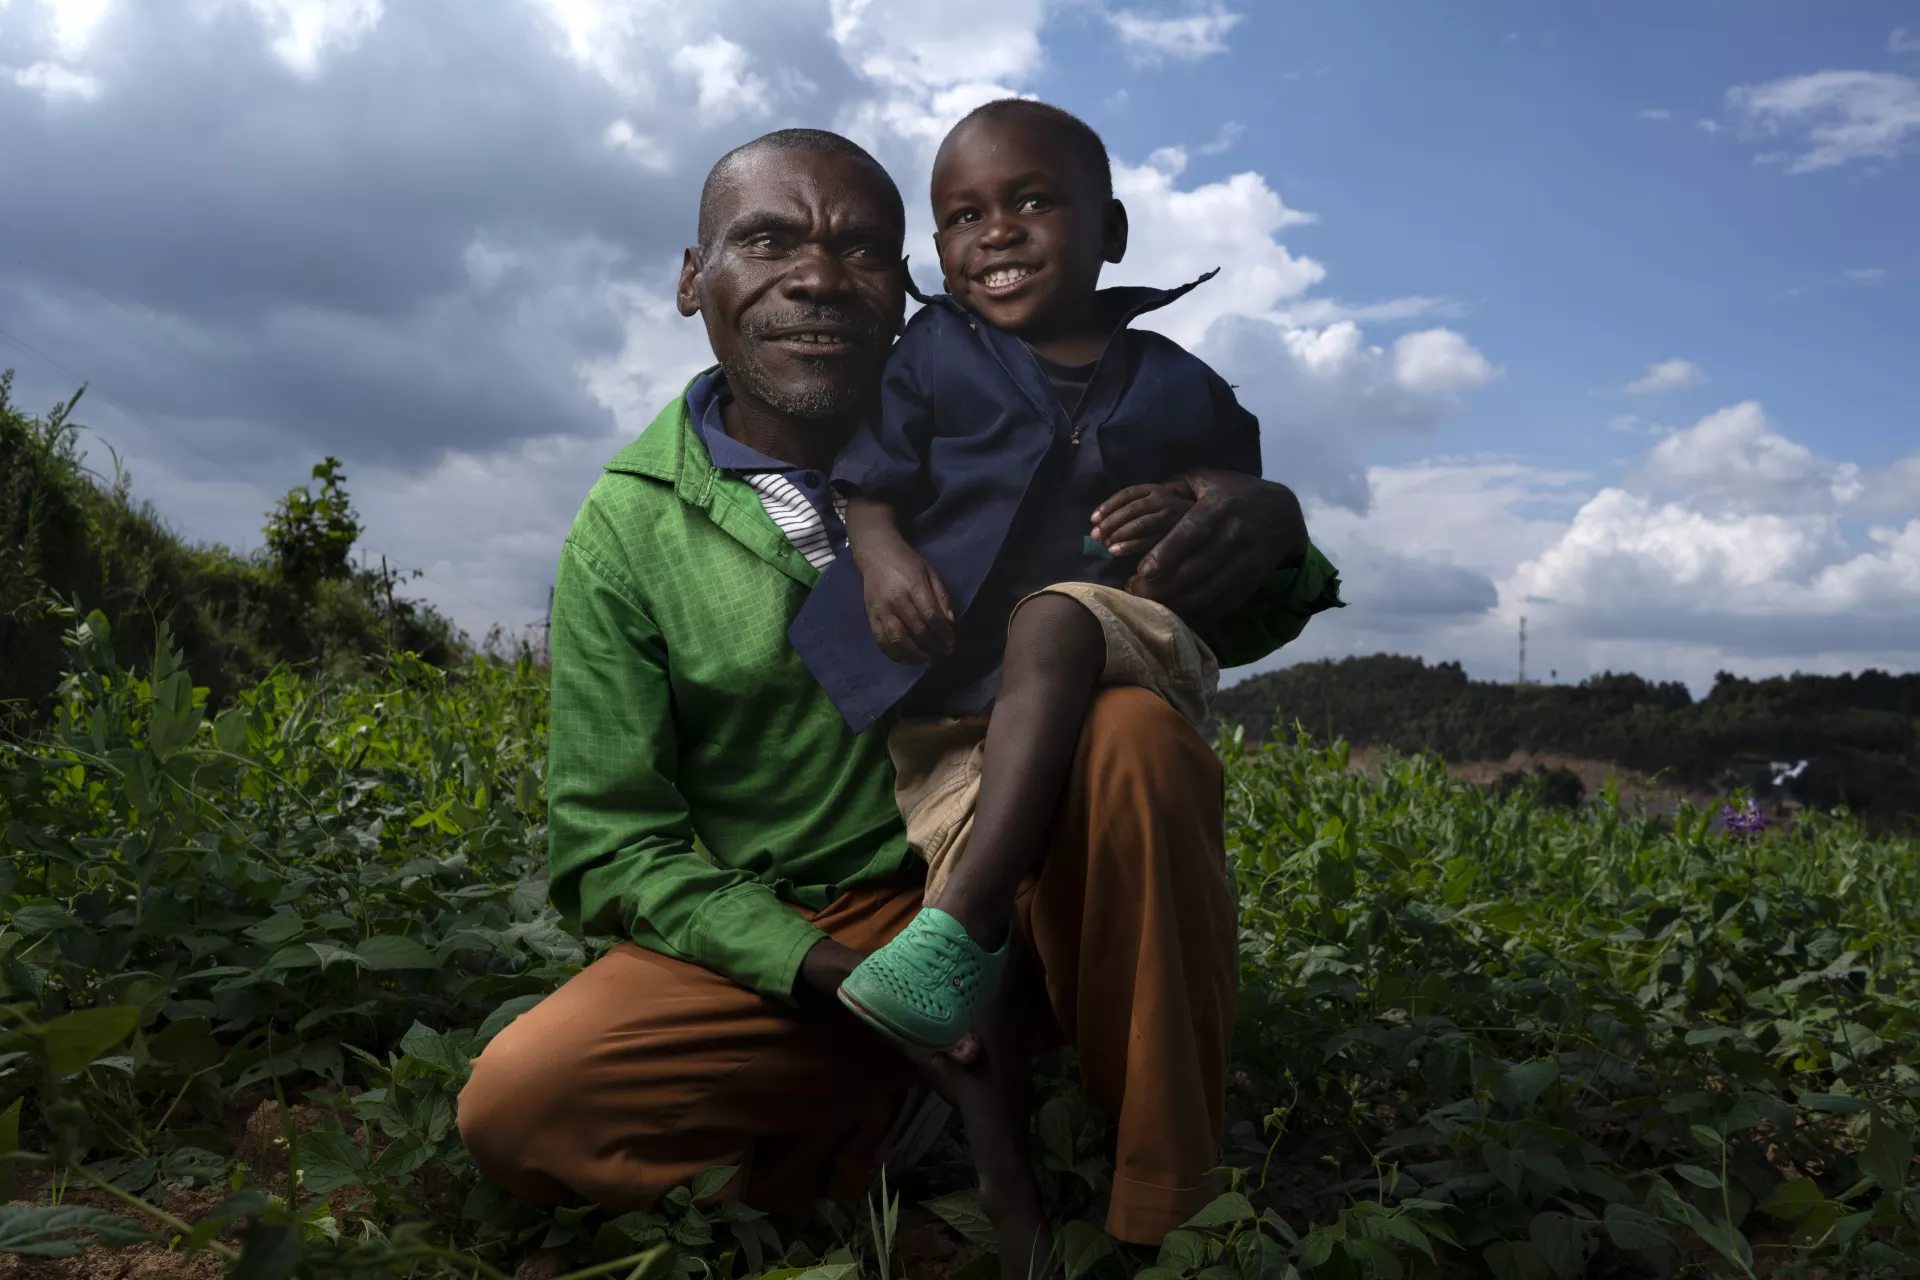 A father squats with his two-year-old son in his lap, both smiling, in a field in Rwanda.